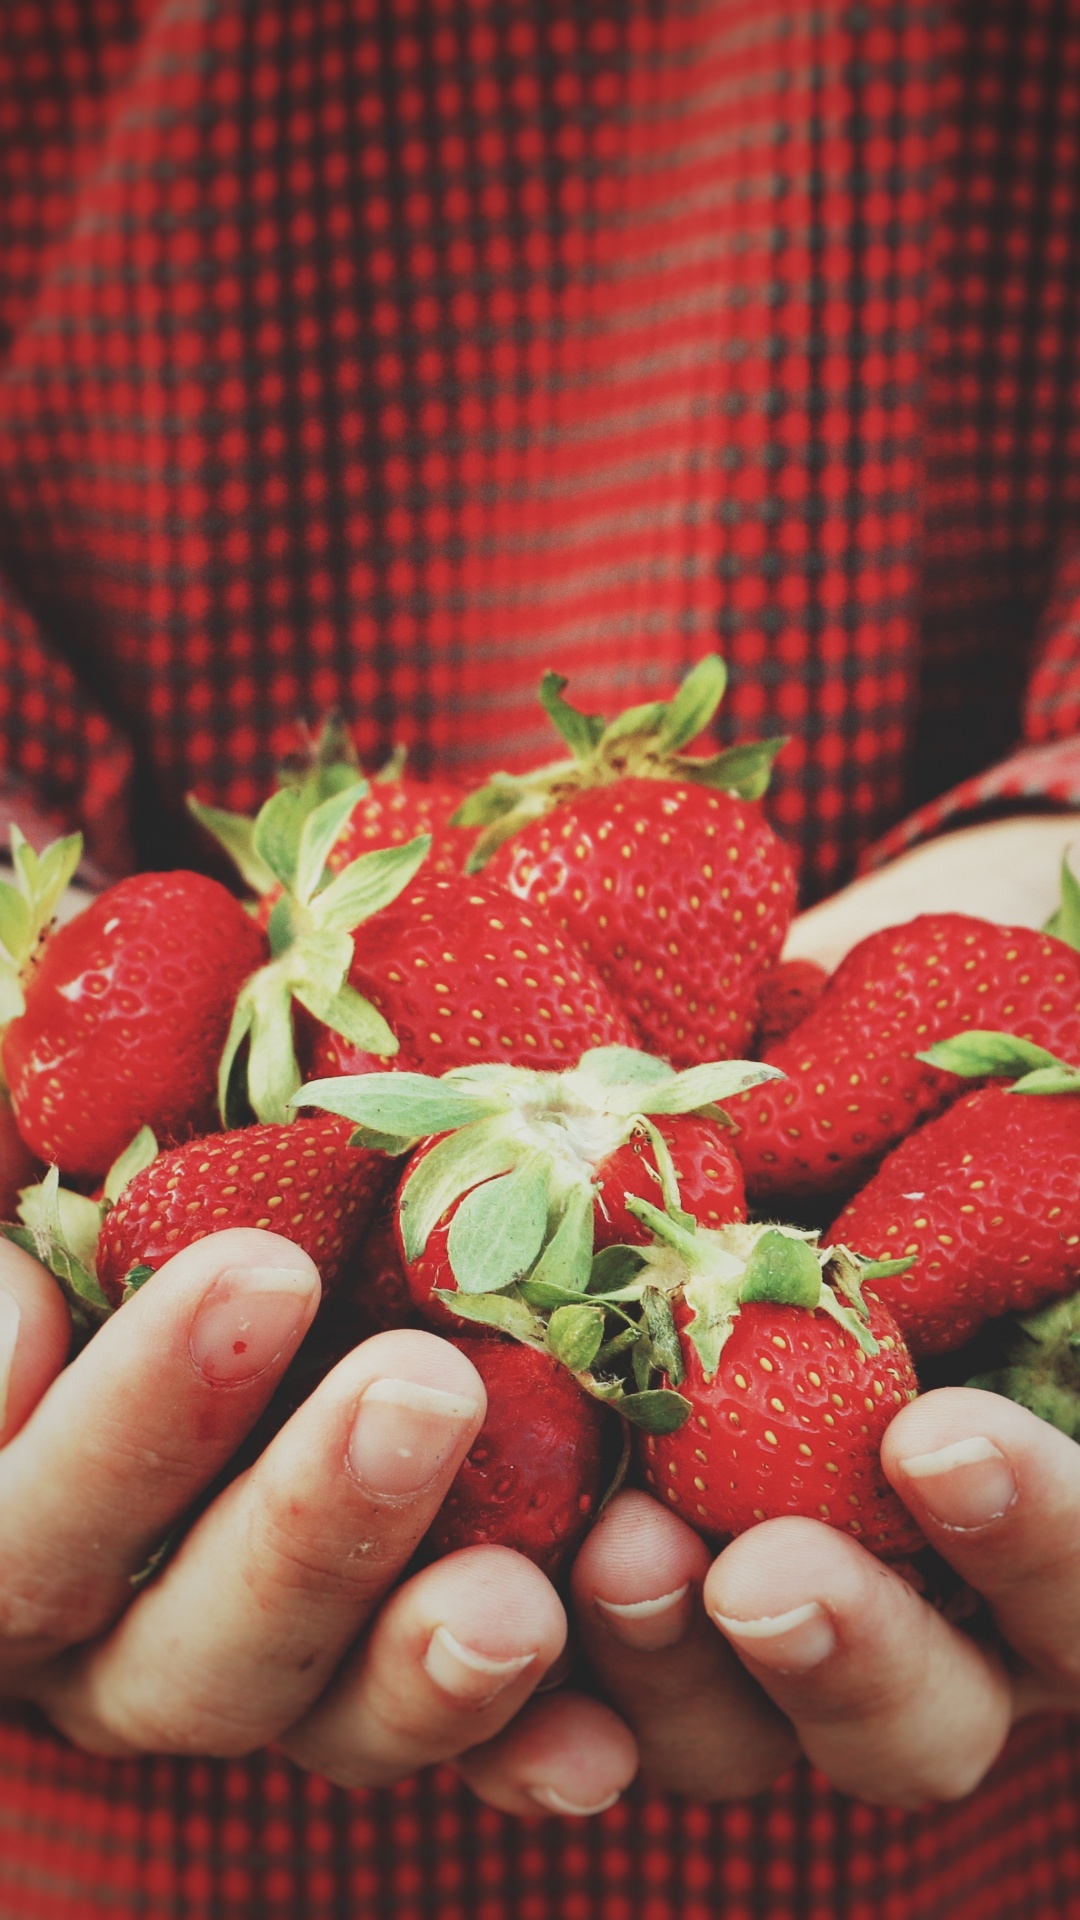 Person Holding Strawberries on Hand. Wallpaper in 1080x1920 Resolution